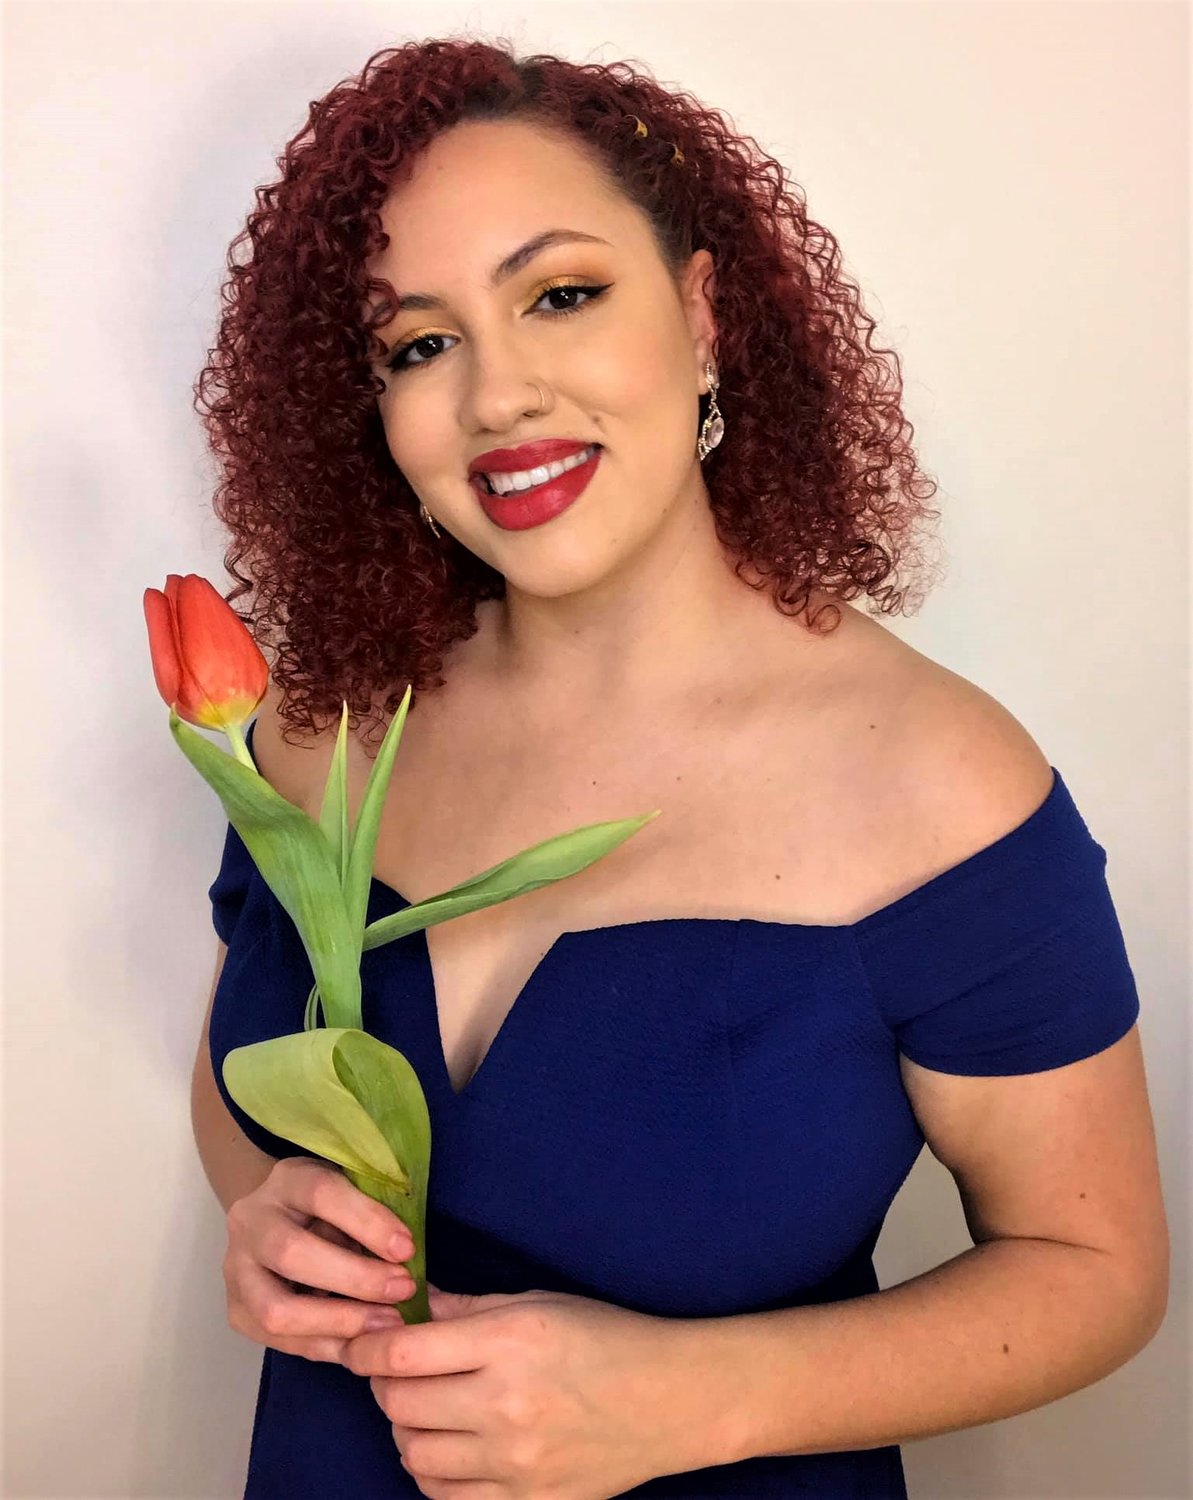 Lisette Rodriguez will be featured in “Songs of Love” with Linda Flynn and Michael Daughtry at The Sweet Palette bake shop, 101 Person St., this weekend.